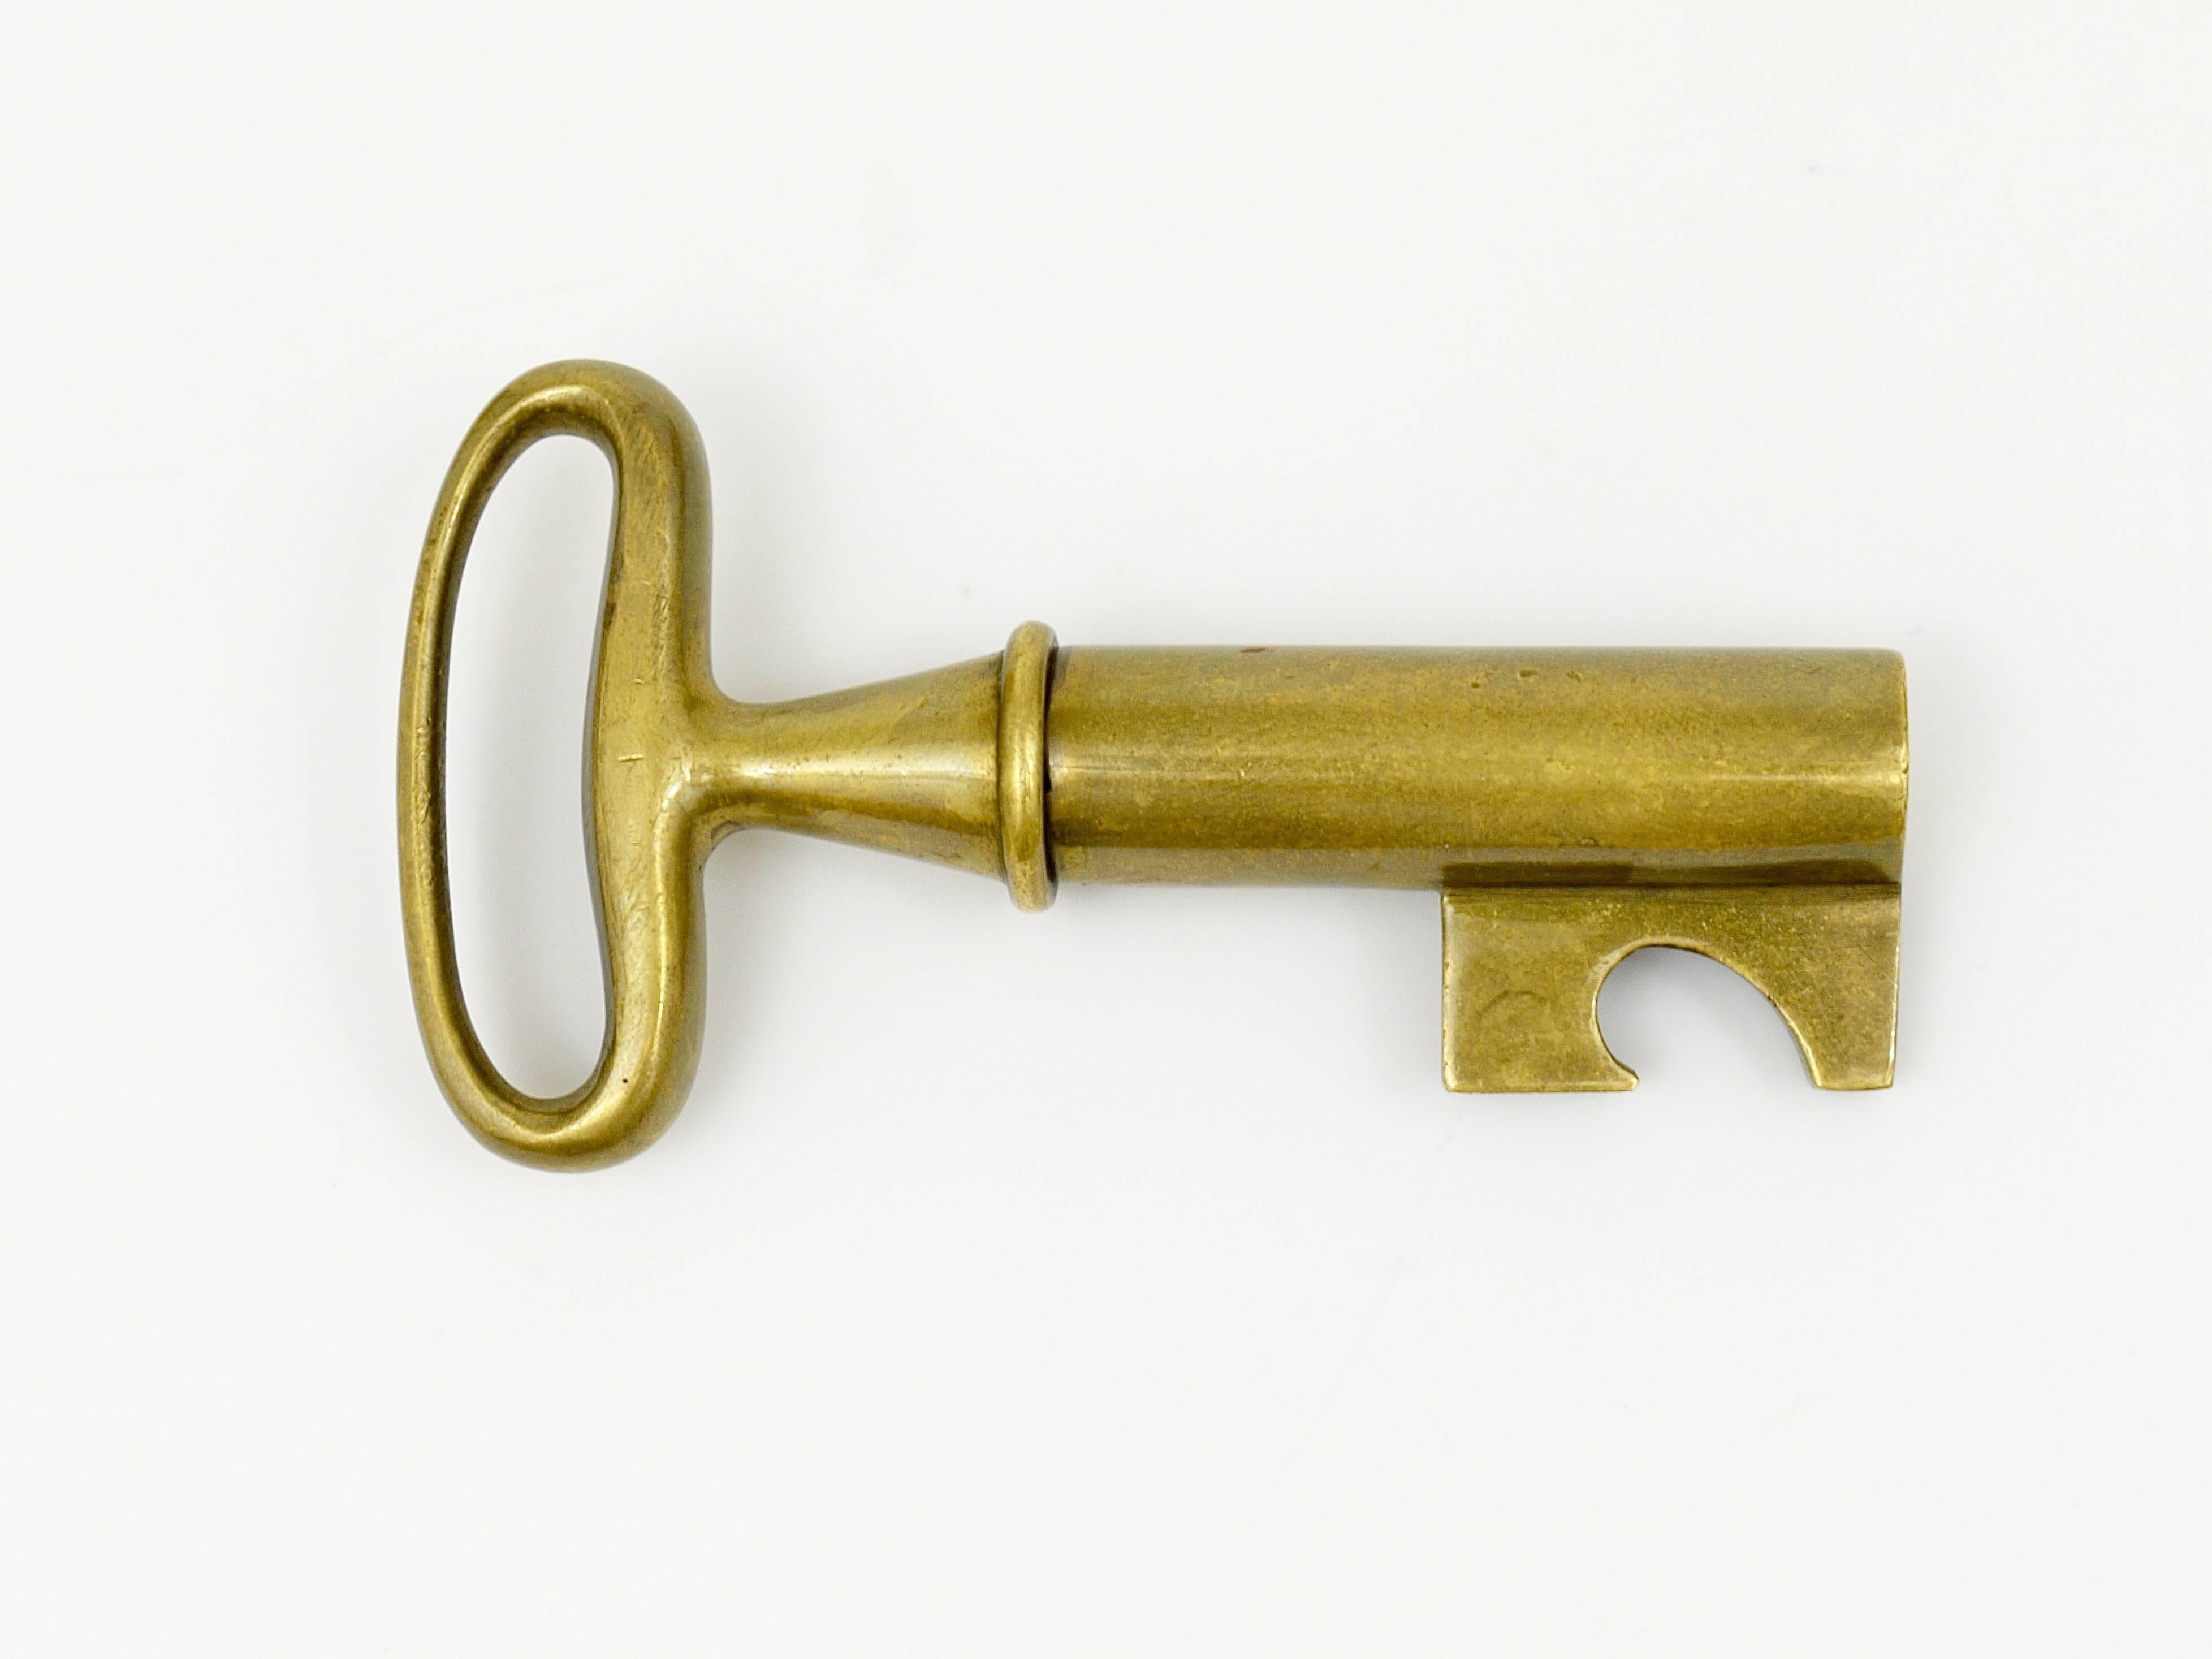 A beautiful cork screw in the shape of a key, designed and executed by Carl Aubock, Austria, 1950s. Marked. A Carl Aubock classic in good condition with nice patina. 

We offer an identical but bigger key cork screw in our other listing. 